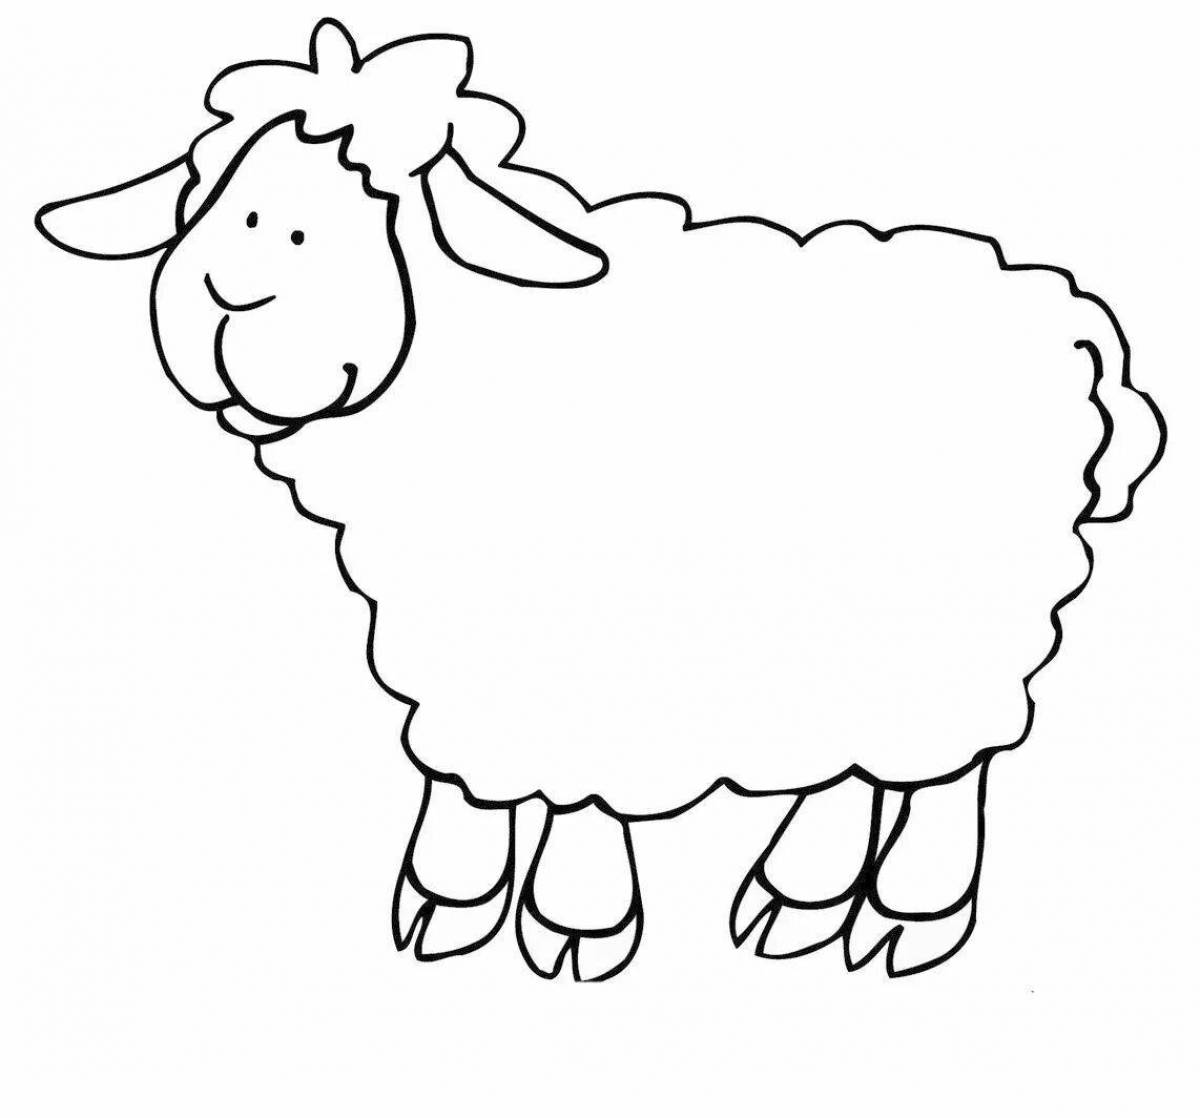 Sheep coloring for games for children 2-3 years old